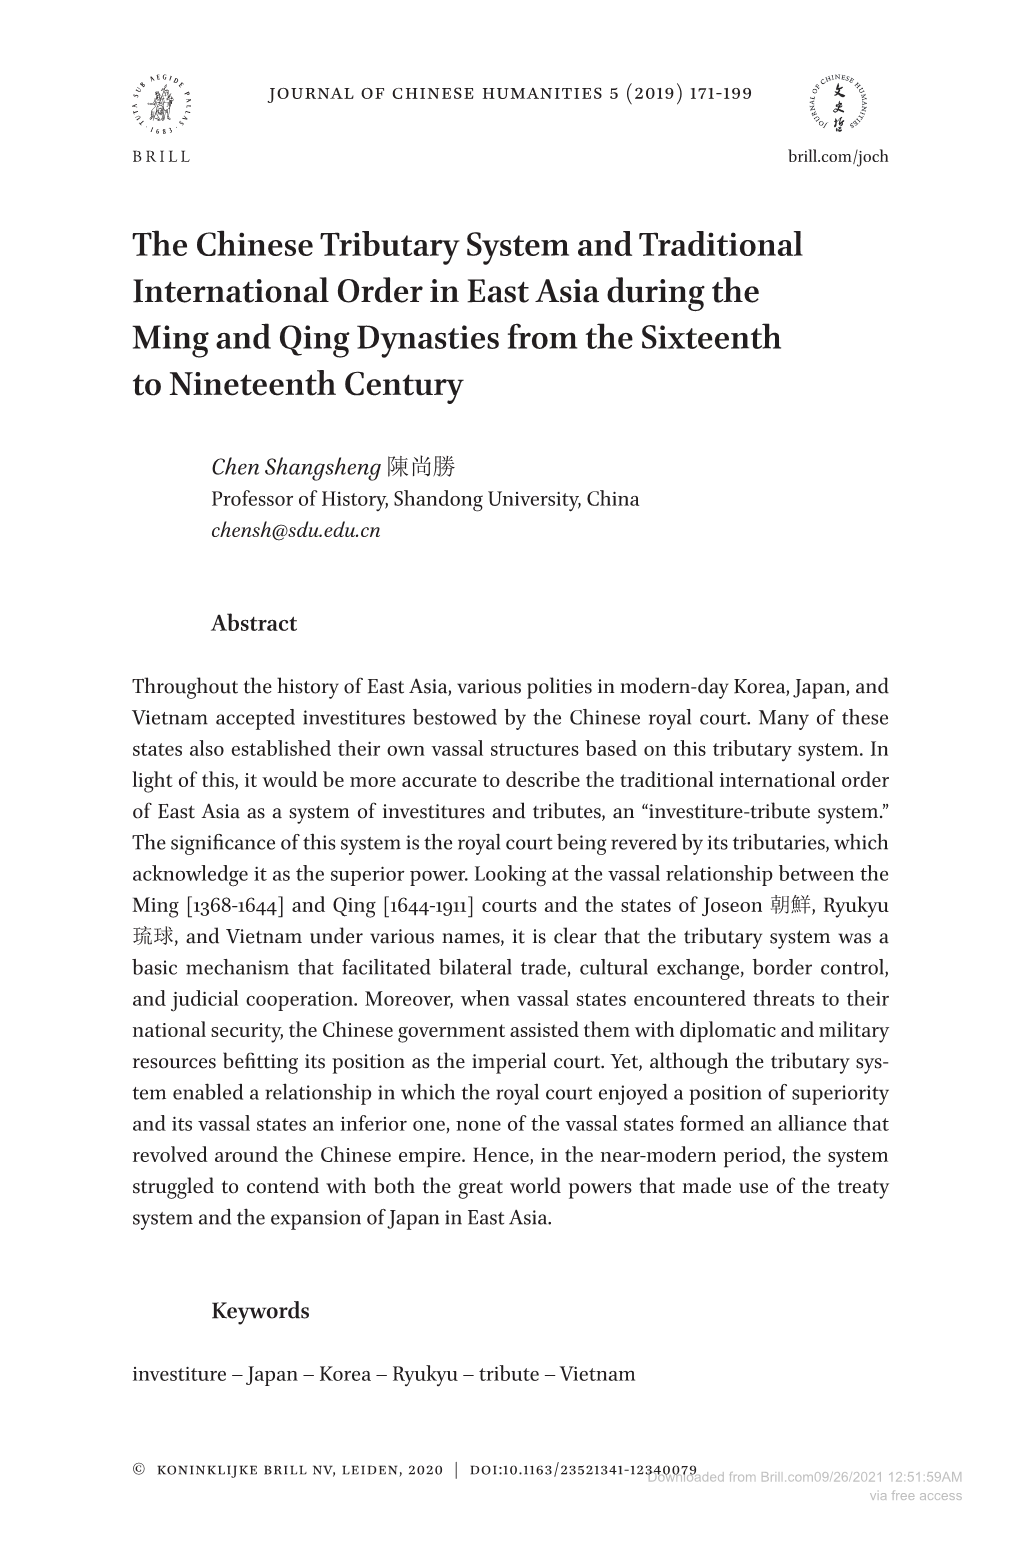 The Chinese Tributary System and Traditional International Order in East Asia During the Ming and Qing Dynasties from the Sixteenth to Nineteenth Century